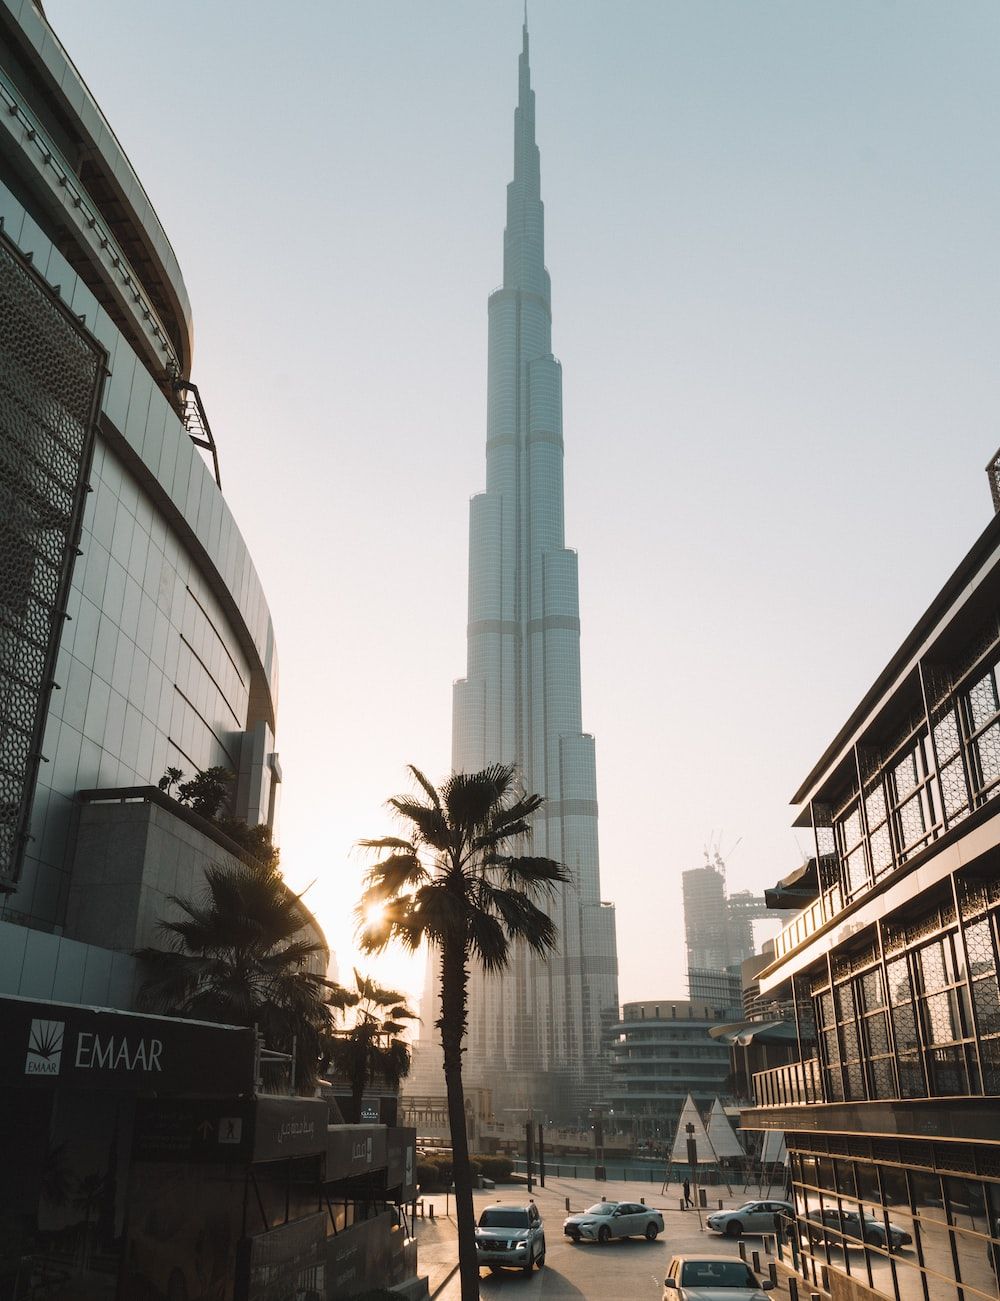 A city street with palm trees and the Burj Khalifa in the background. - Dubai